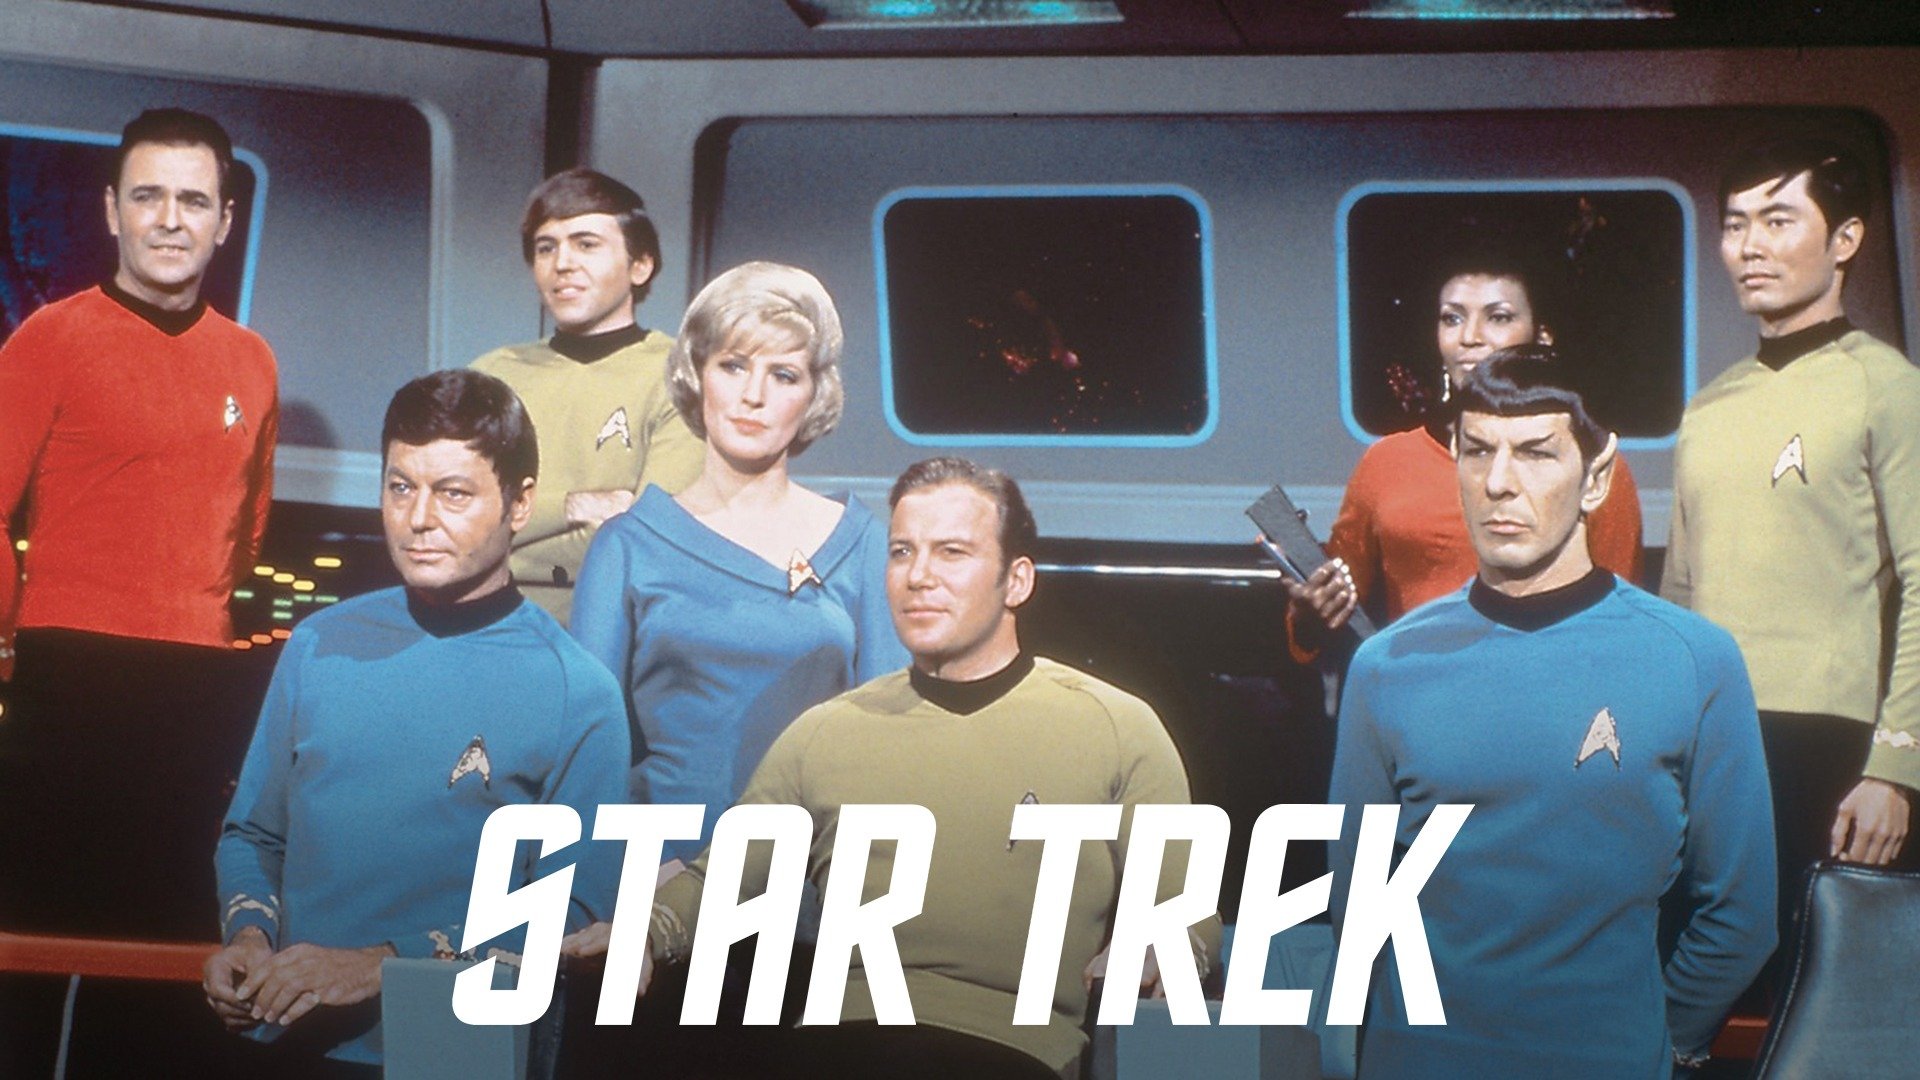 47-facts-about-the-movie-star-trek